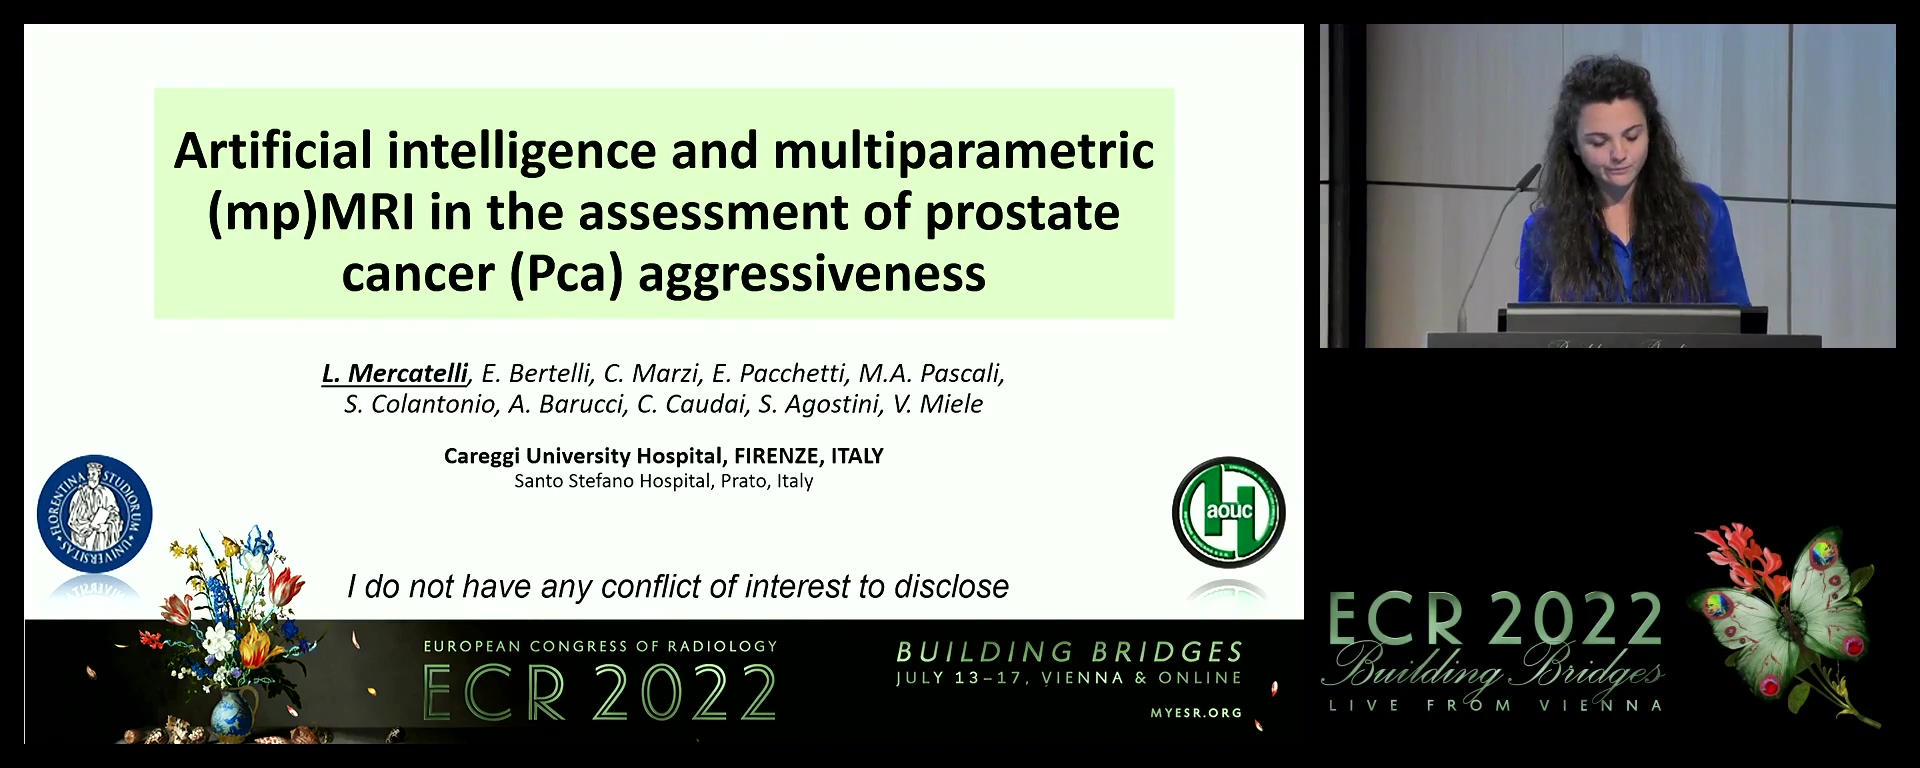 Artificial intelligence and multiparametric (mp)MRI in the assessment of prostate cancer (PCa) aggressiveness